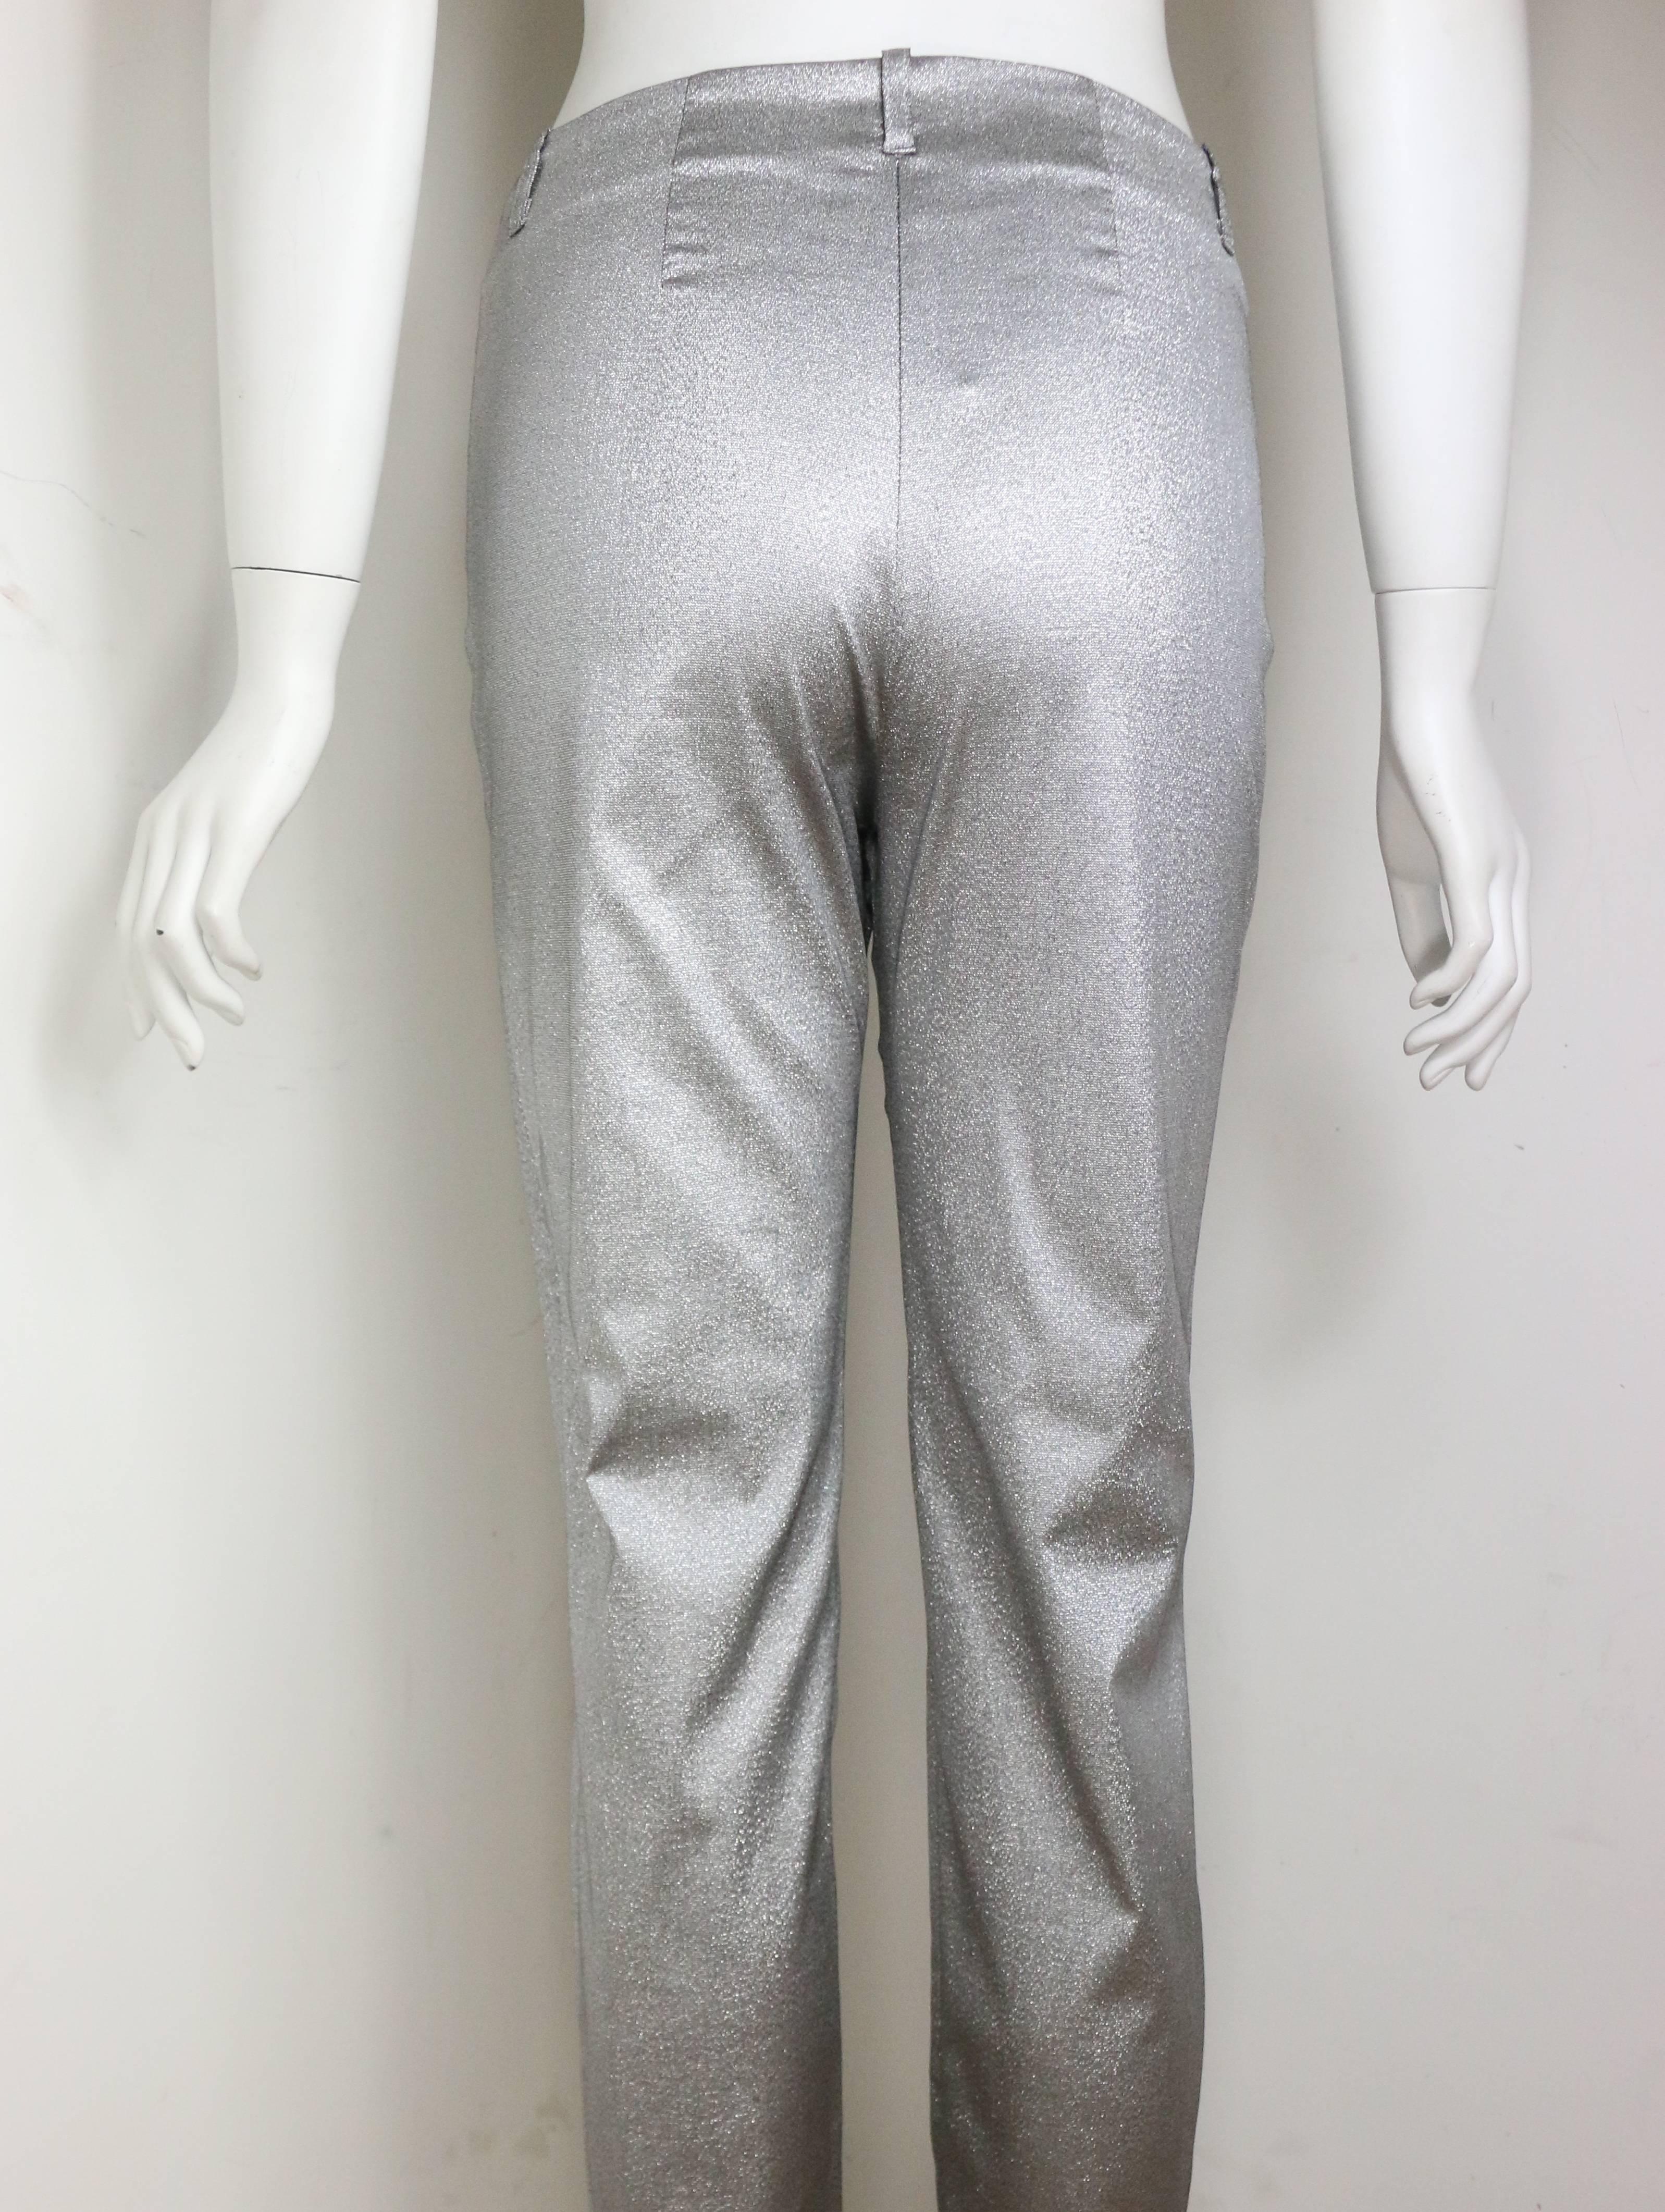 - Vintage 90s Plein Sud silver metallic pants. Featuring a silver button and zipper closure. The fabric of pants is sketchy and a straight leg cutting fits for everyone! 

- Made in France. 

- Size 42/10. 

- 50%Nylon, 25% Acetate, 20% Polyester,